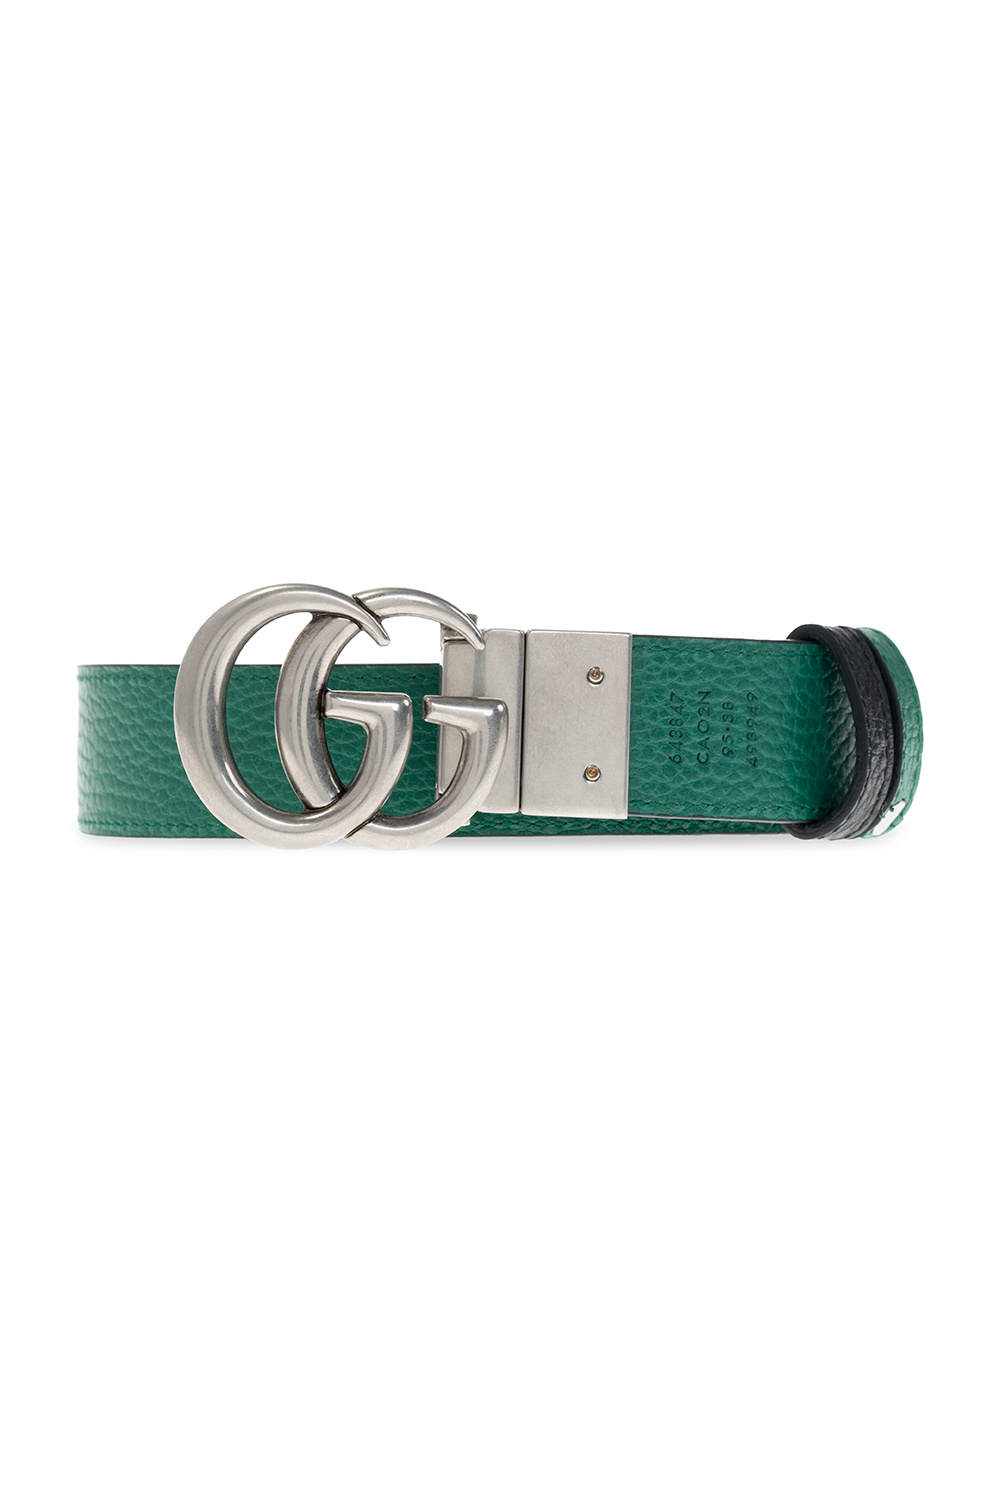 Gucci Reversible belt with logo, Men's Accessories